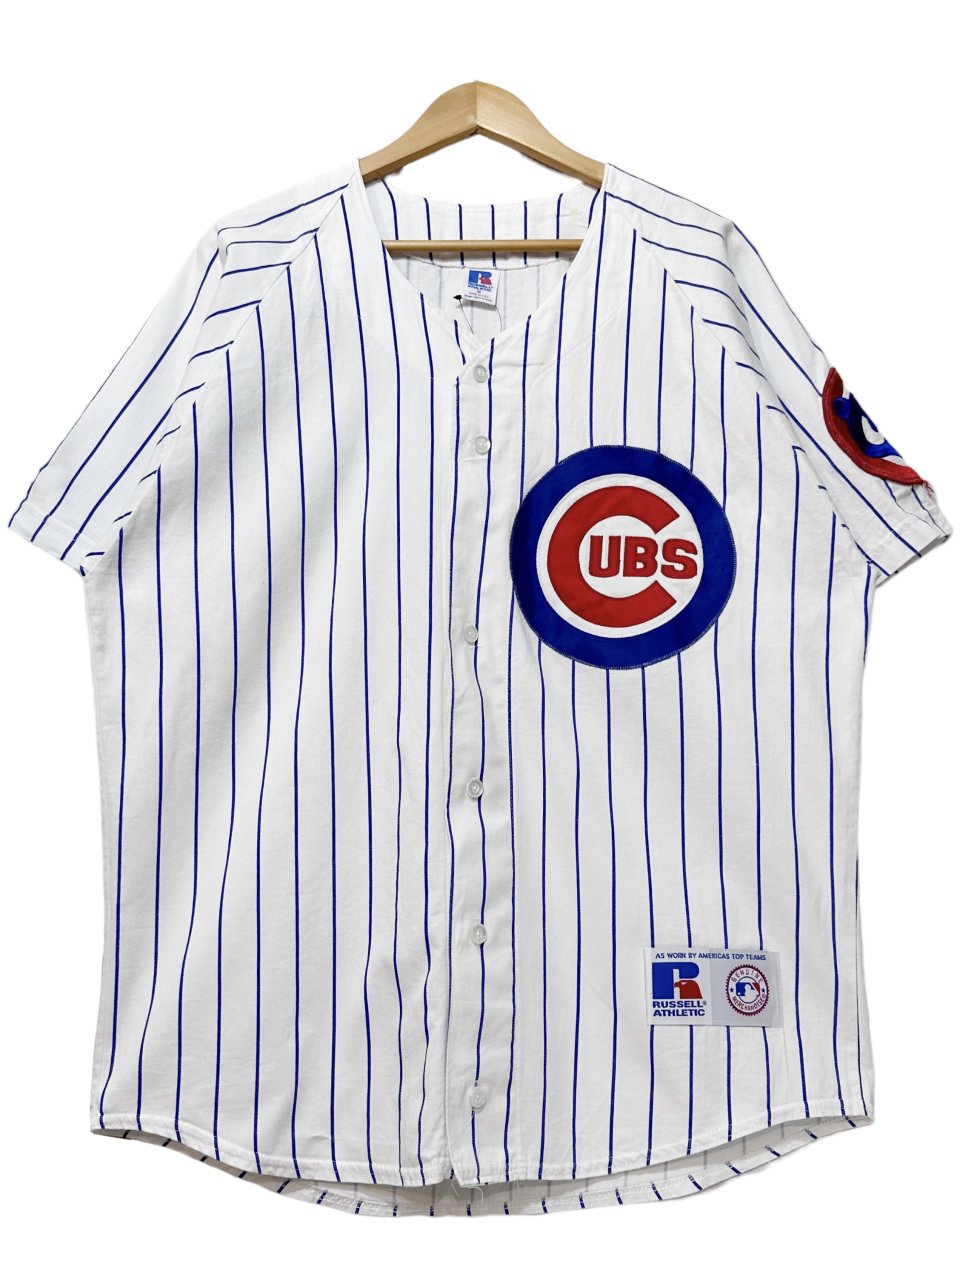 Russell Athletic Chicago Cubs Grey Baseball Jersey